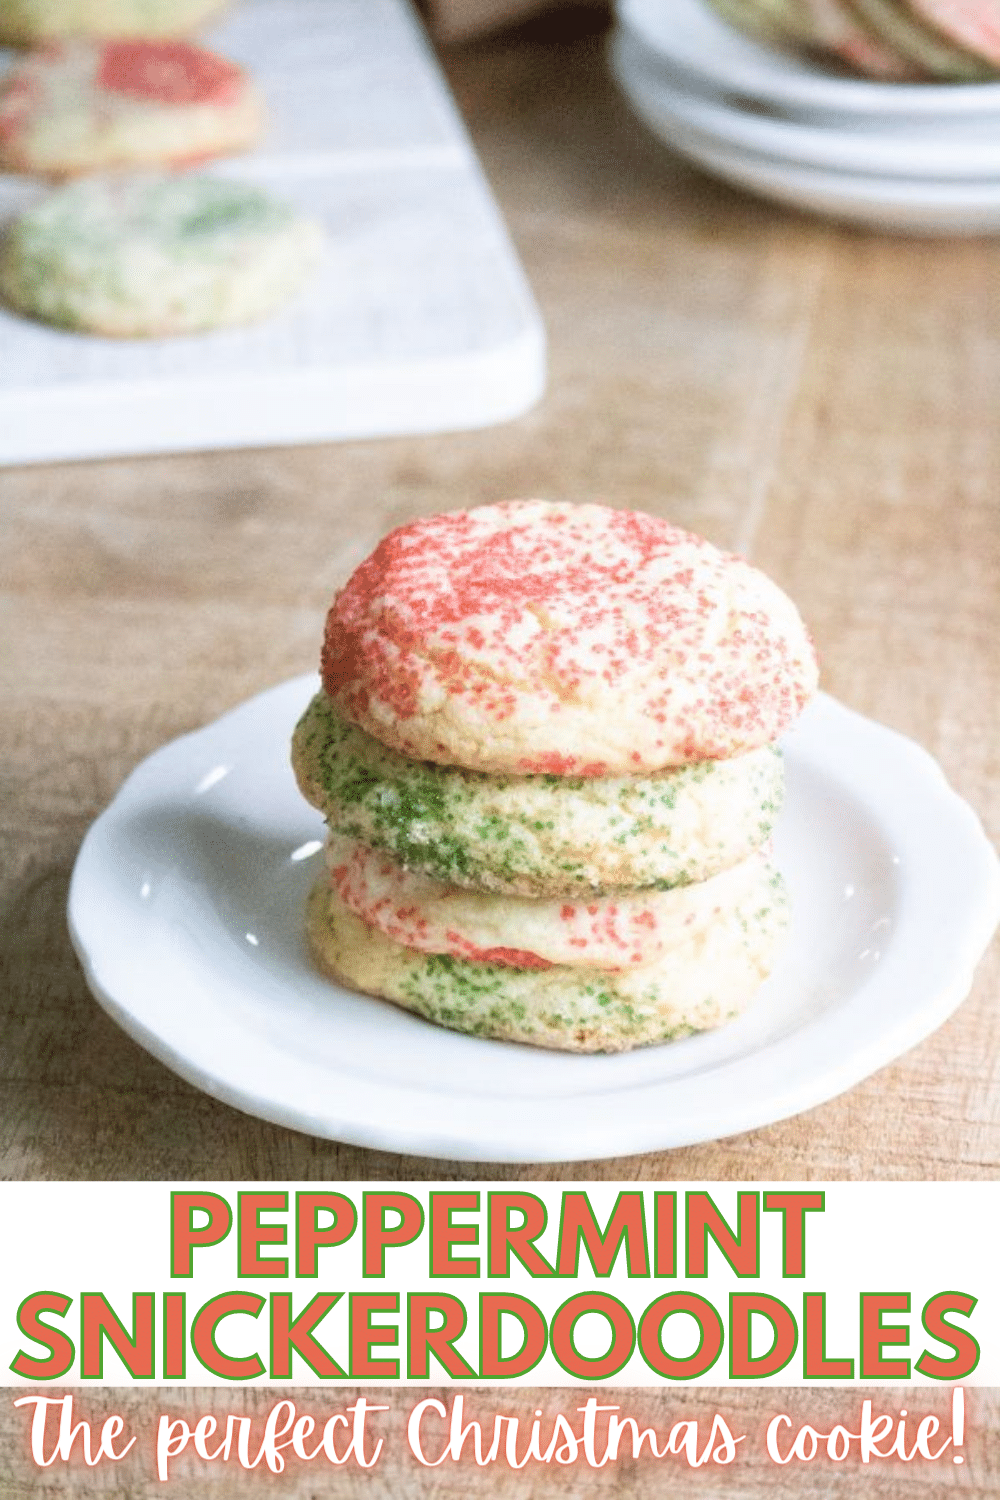 Peppermint snickerdoodles are the perfect Christmas cookies.